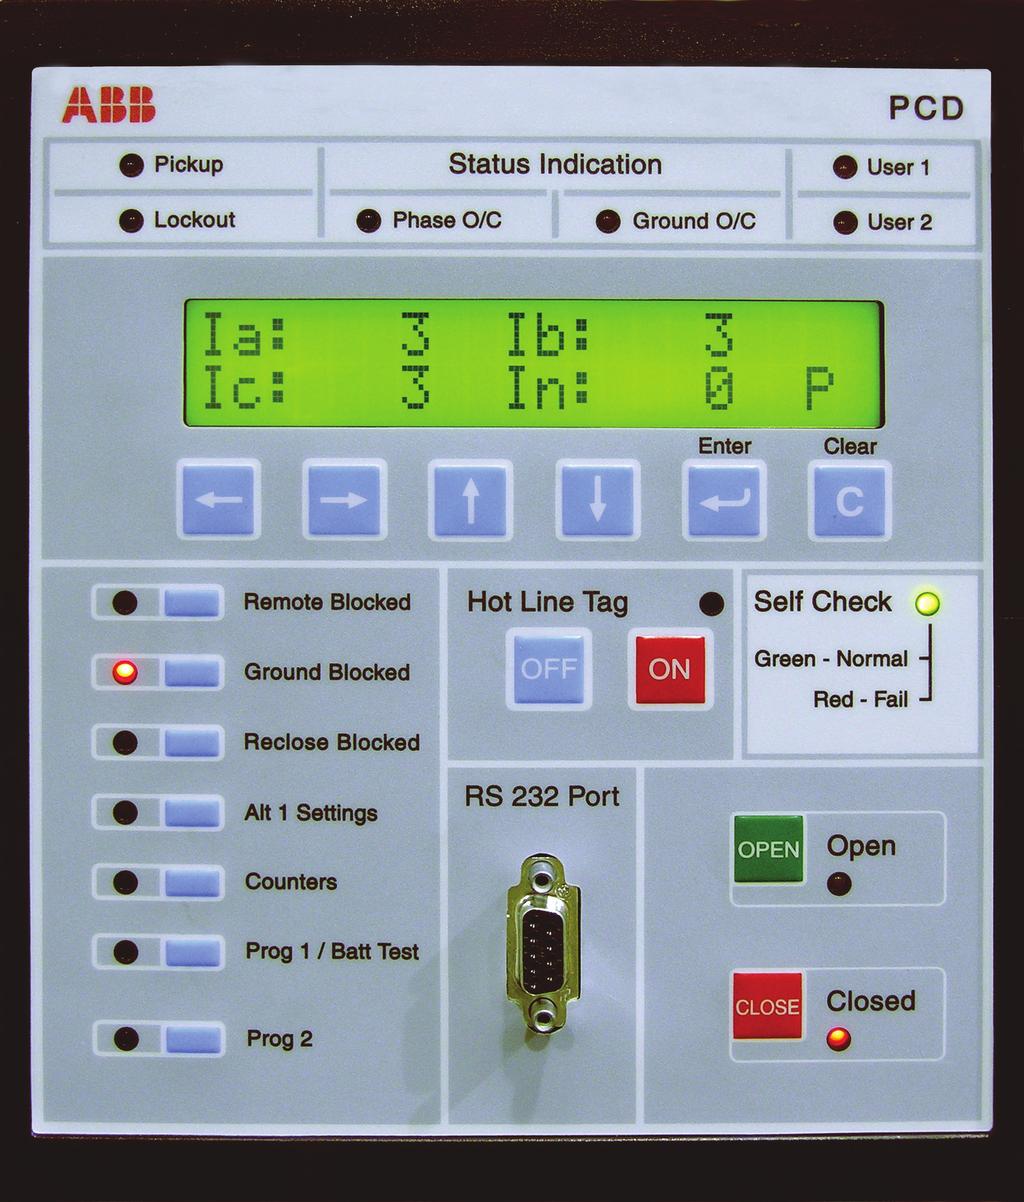 2 1 3 4 5 6 The PCD faceplate is easy to use, program, and